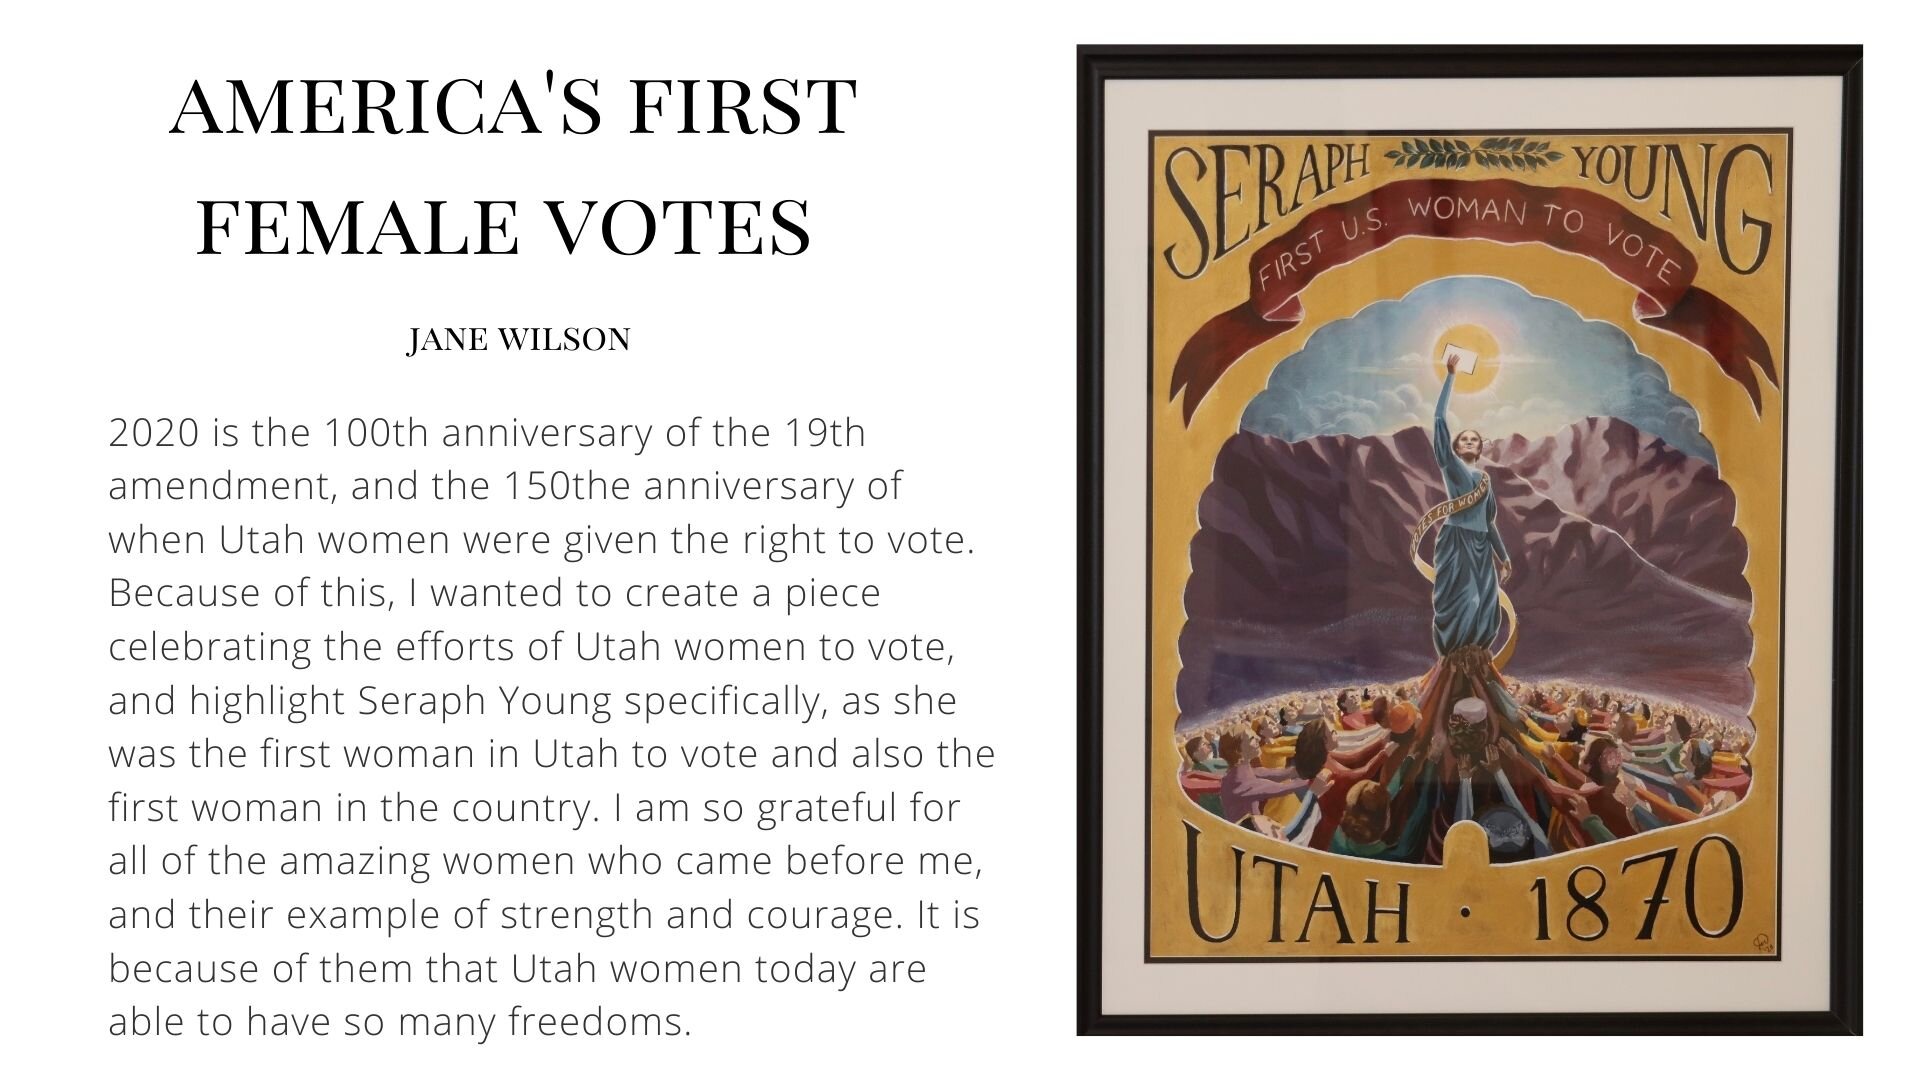 America's First Female Votes by Jane Wilson